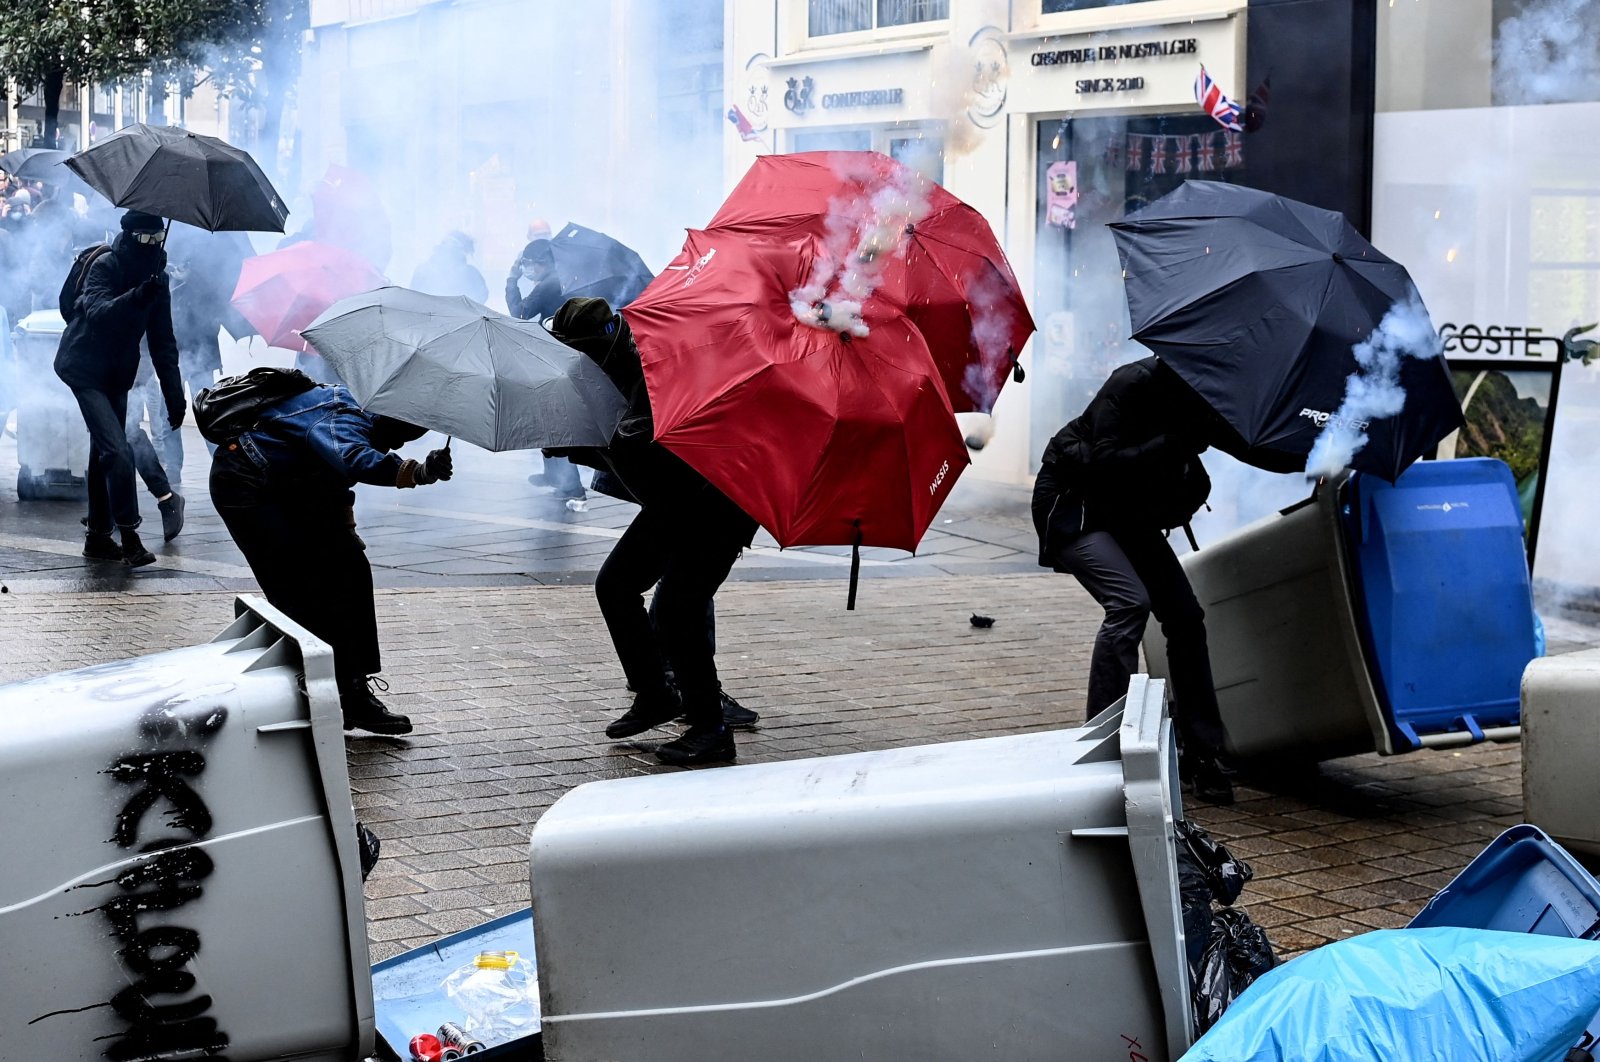 Protesters use umbrellas as protection against tear gas, Nantes, western France, March 11, 2023. (AFP Photo)